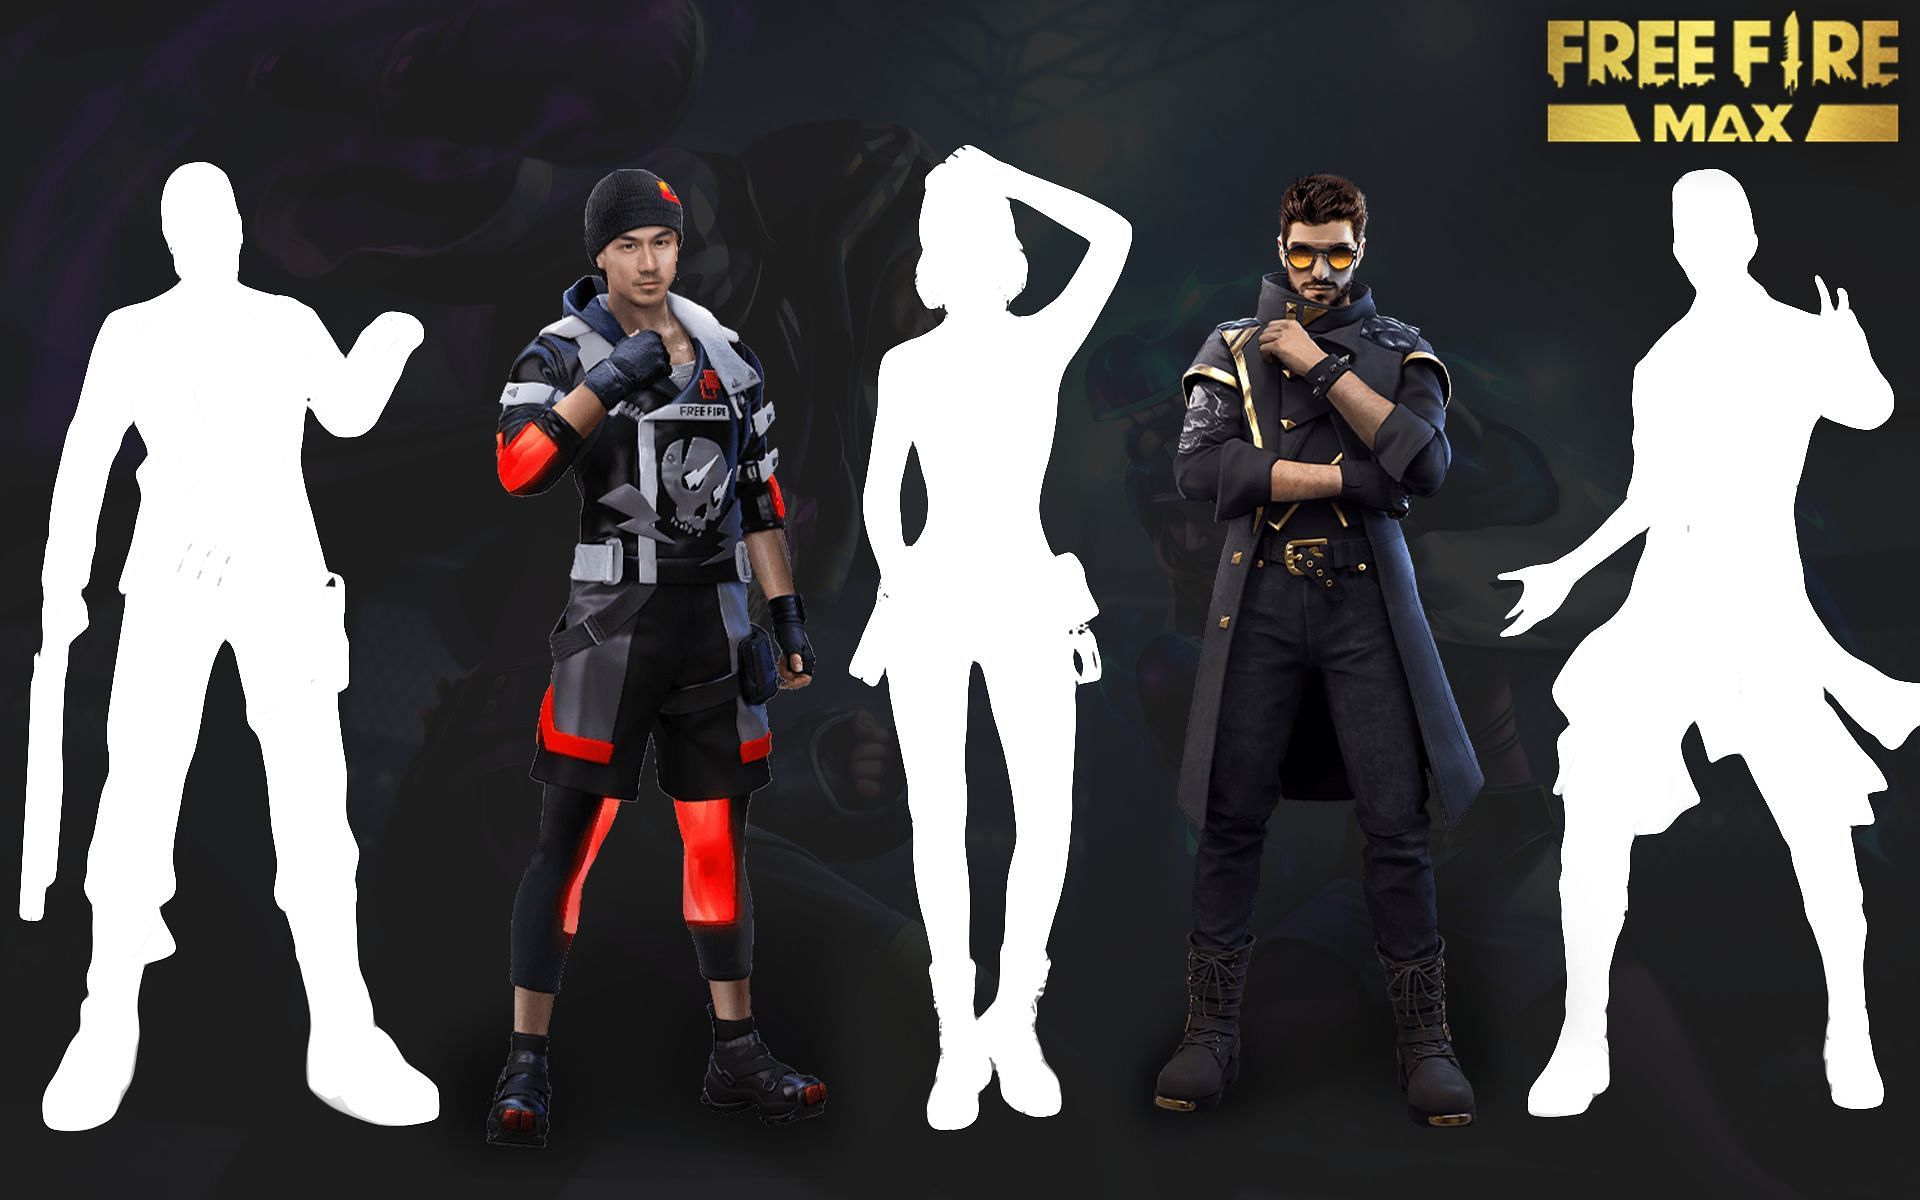 Emerge victorious in Clash Squad mode by using these Free Fire MAX characters (Image via Sportskeeda)